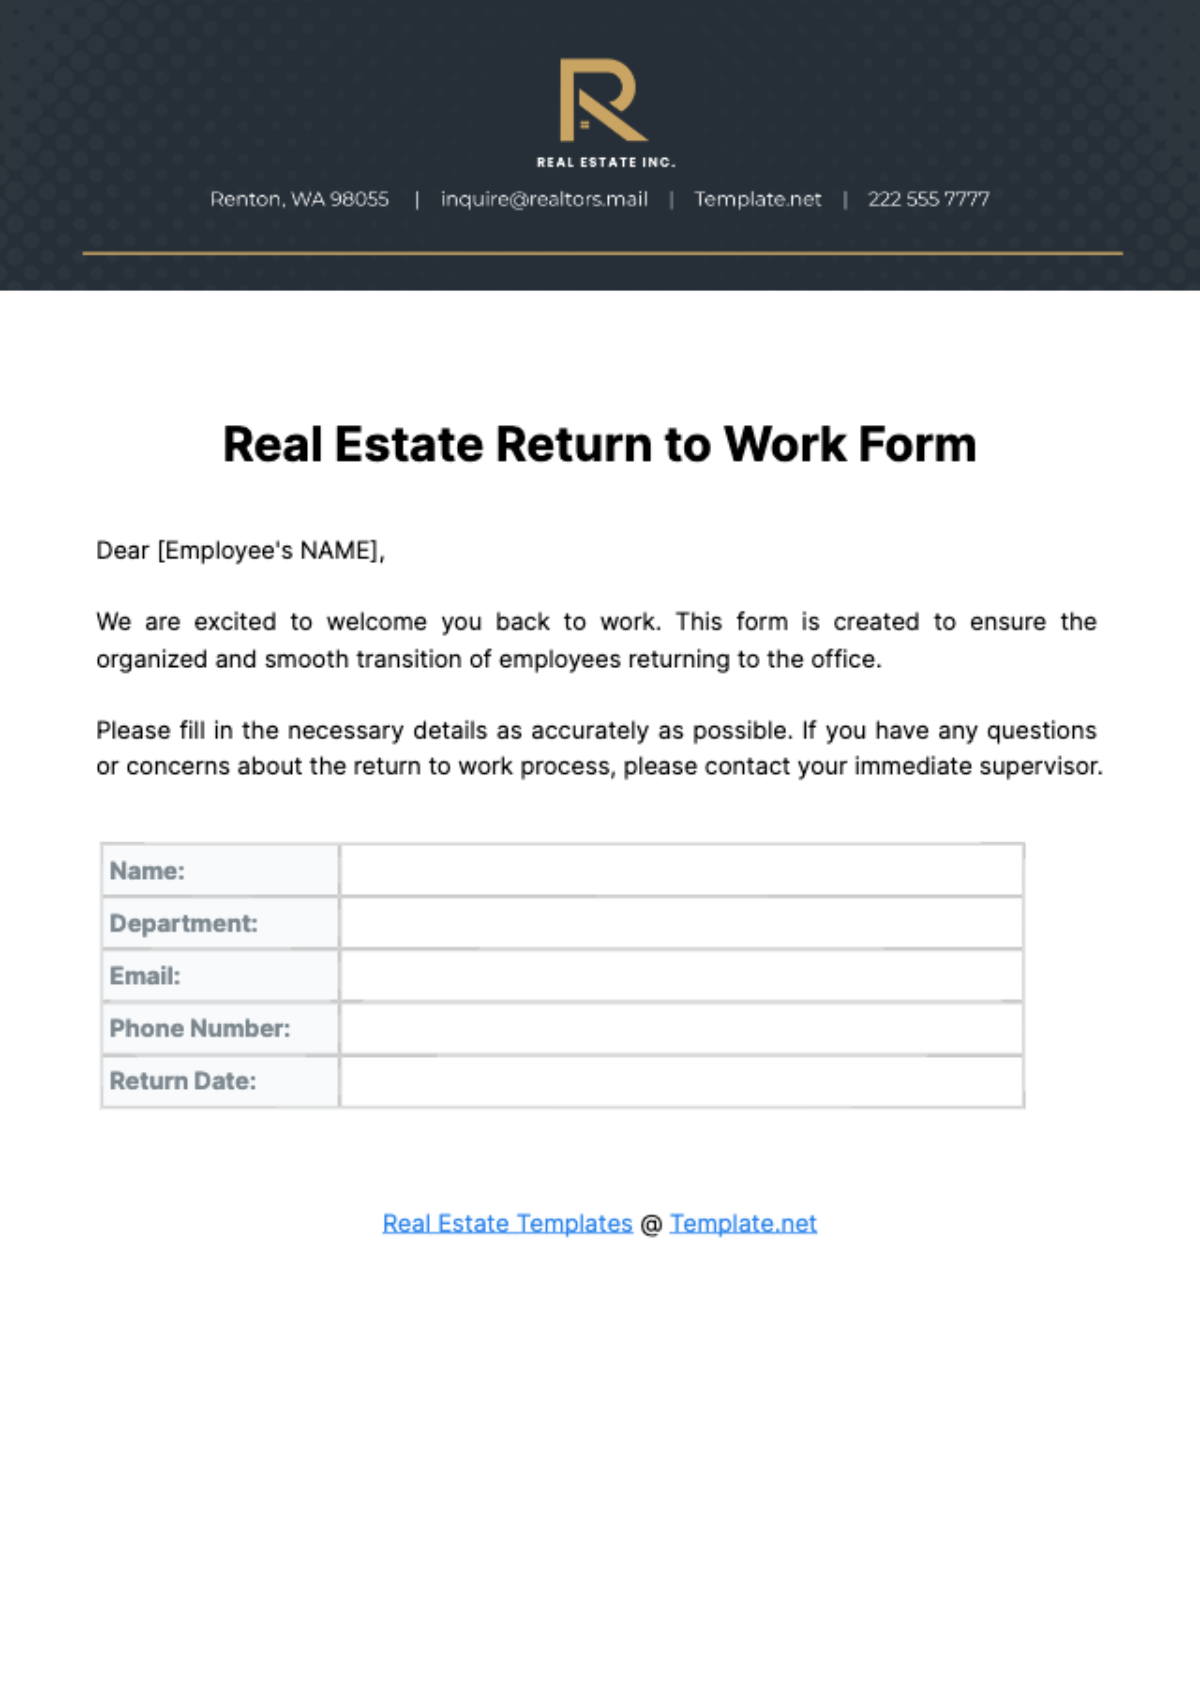 Real Estate Return to Work Form Template